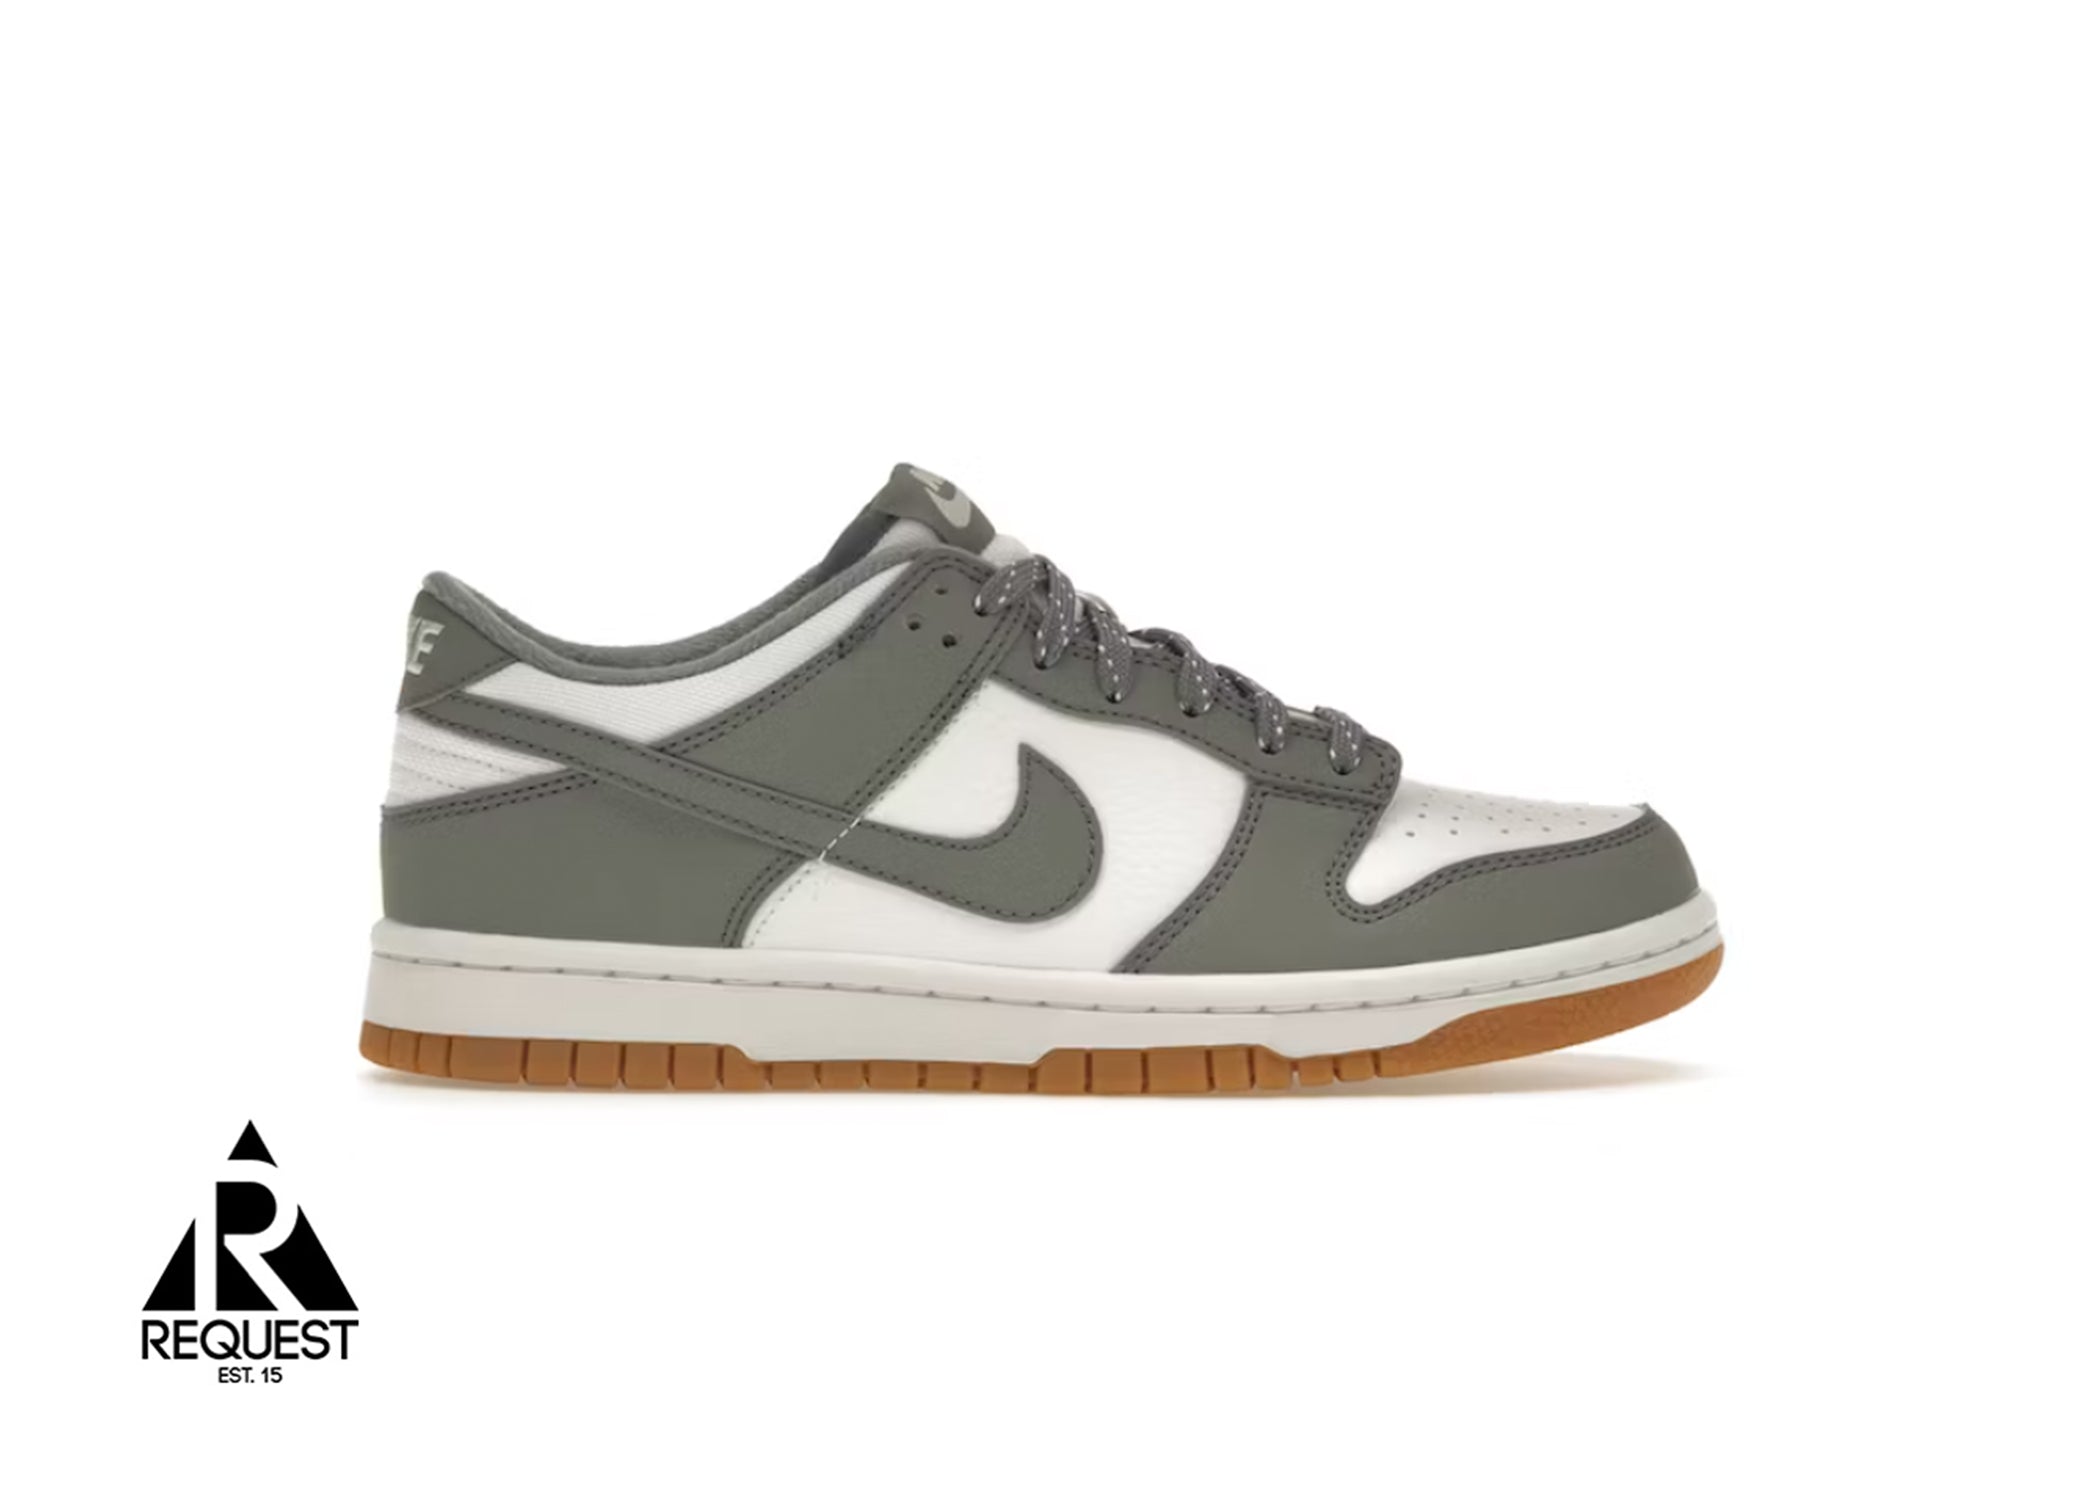 Nike Dunk Low “Reflective Grey” (GS)